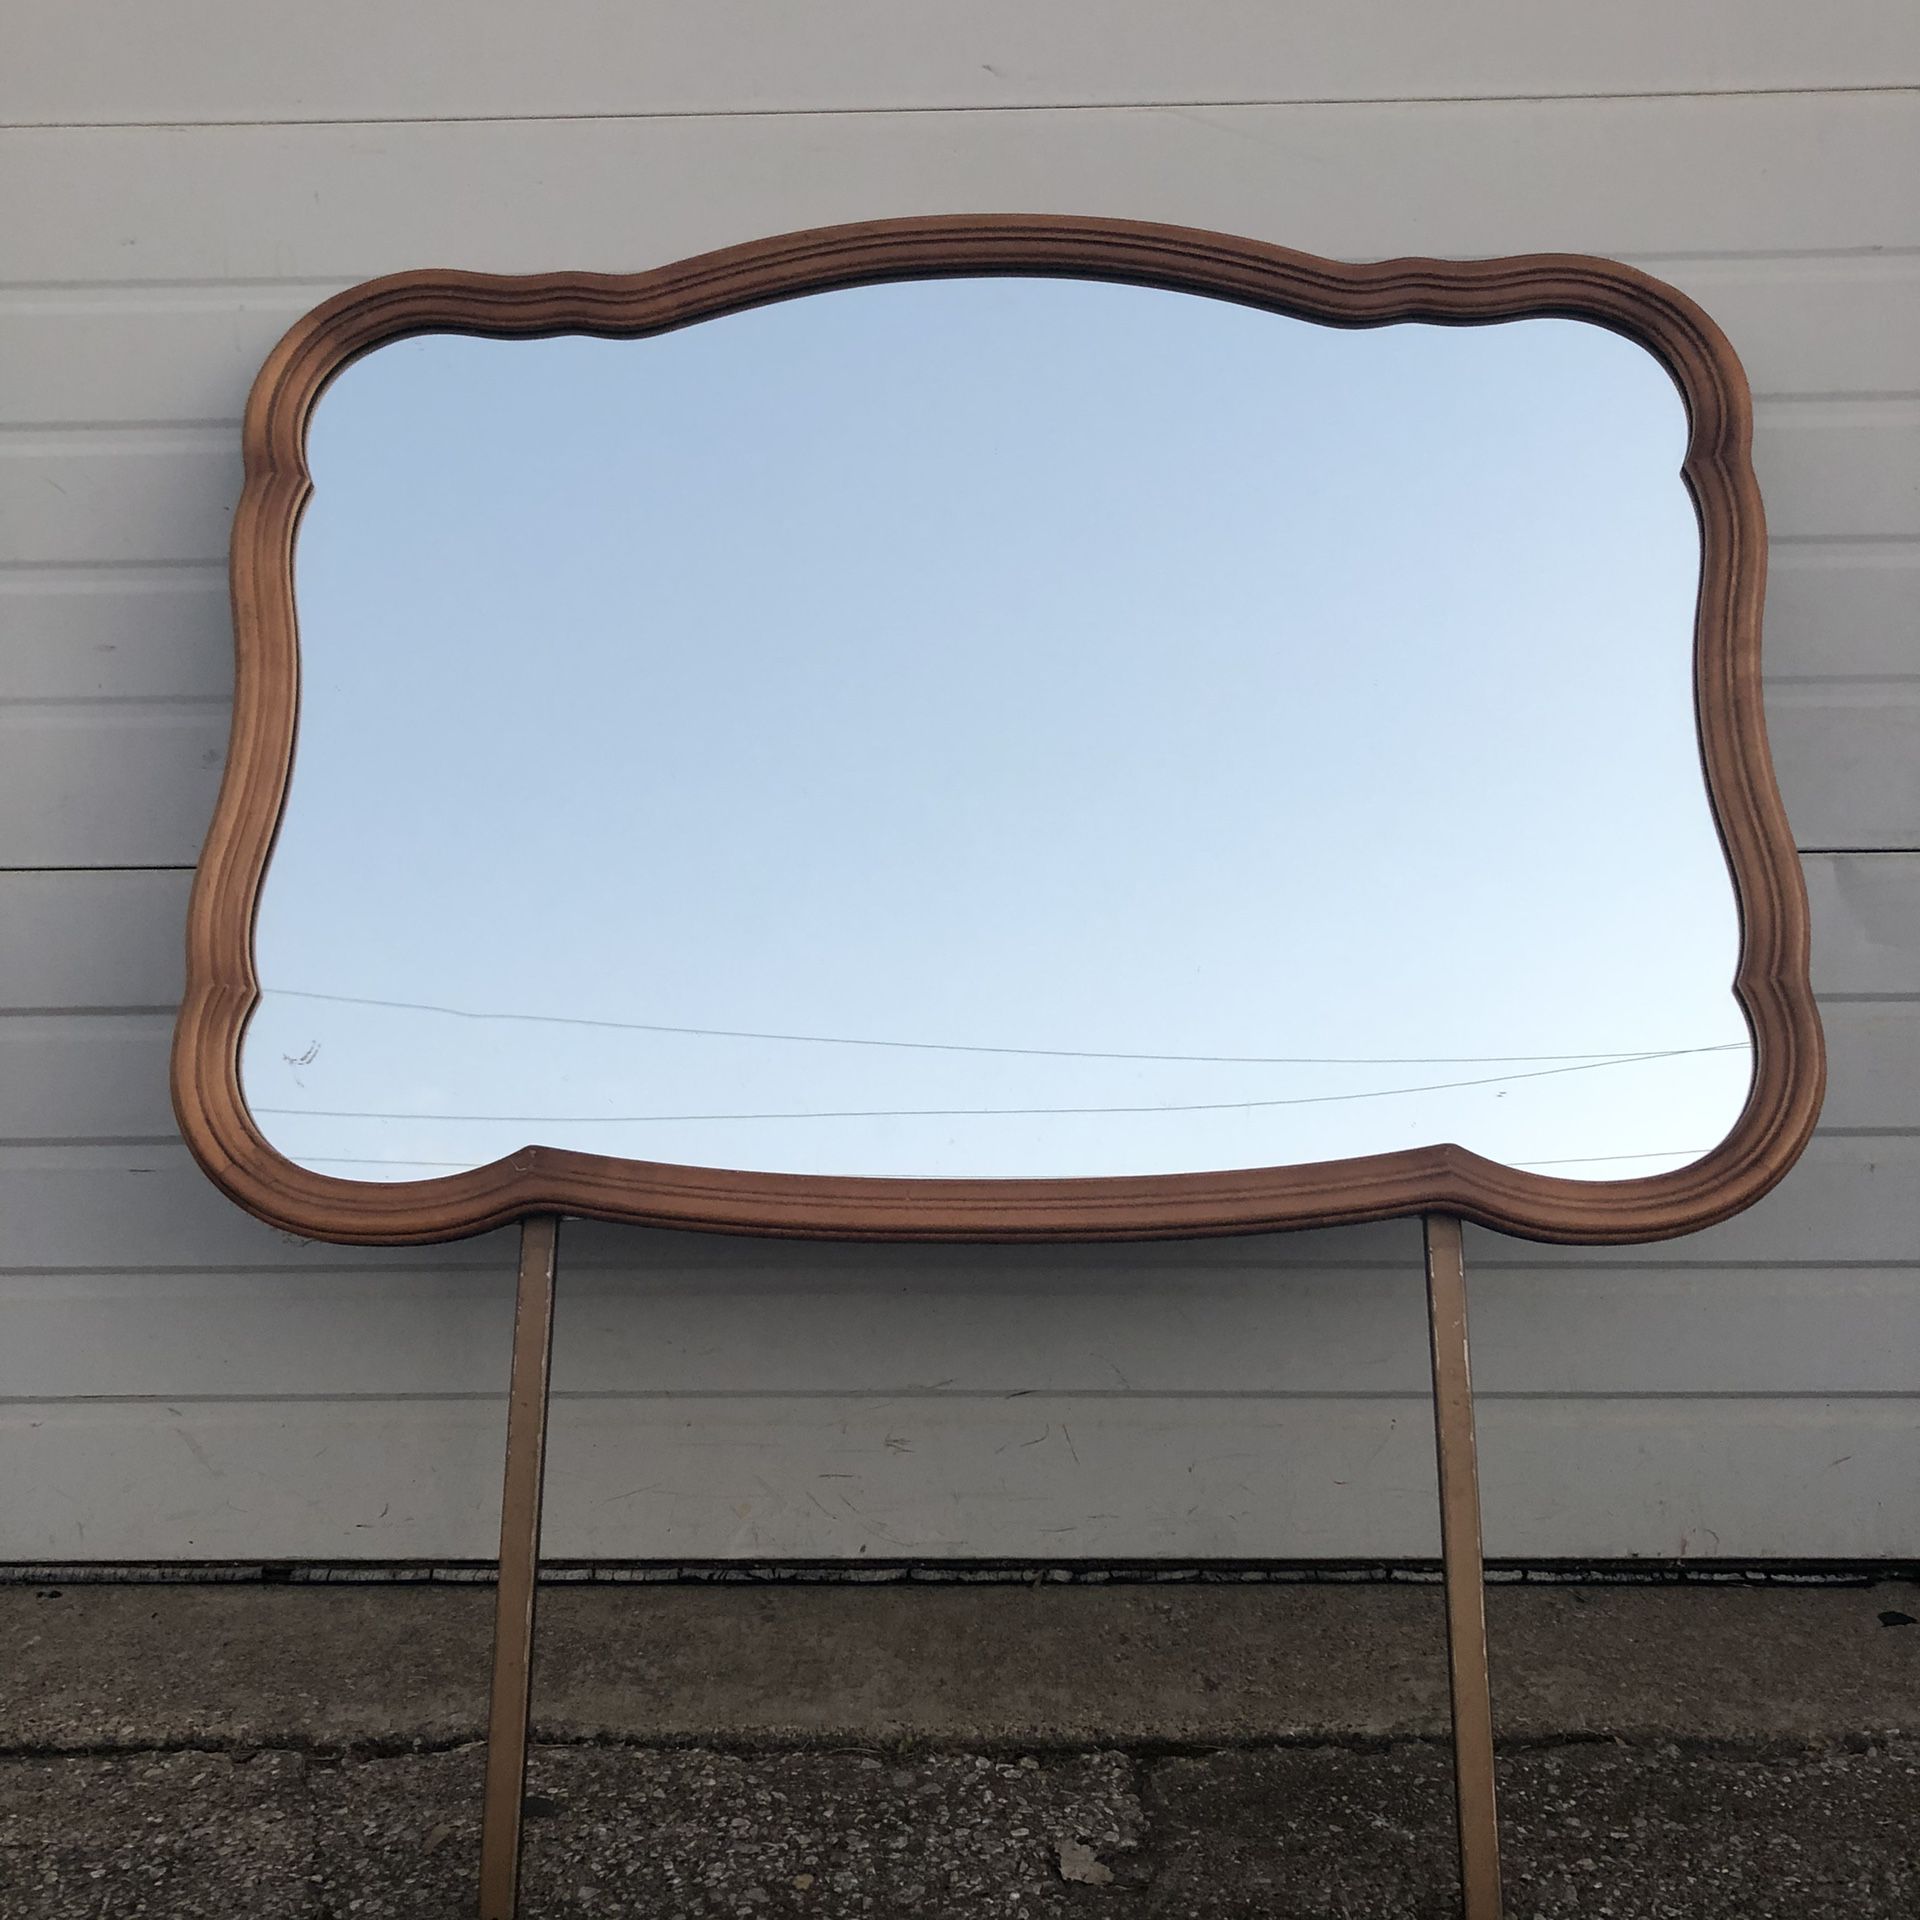 $50 Firm. 1 French style vintage wood framed mirror for a dresser or wall. No dresser.